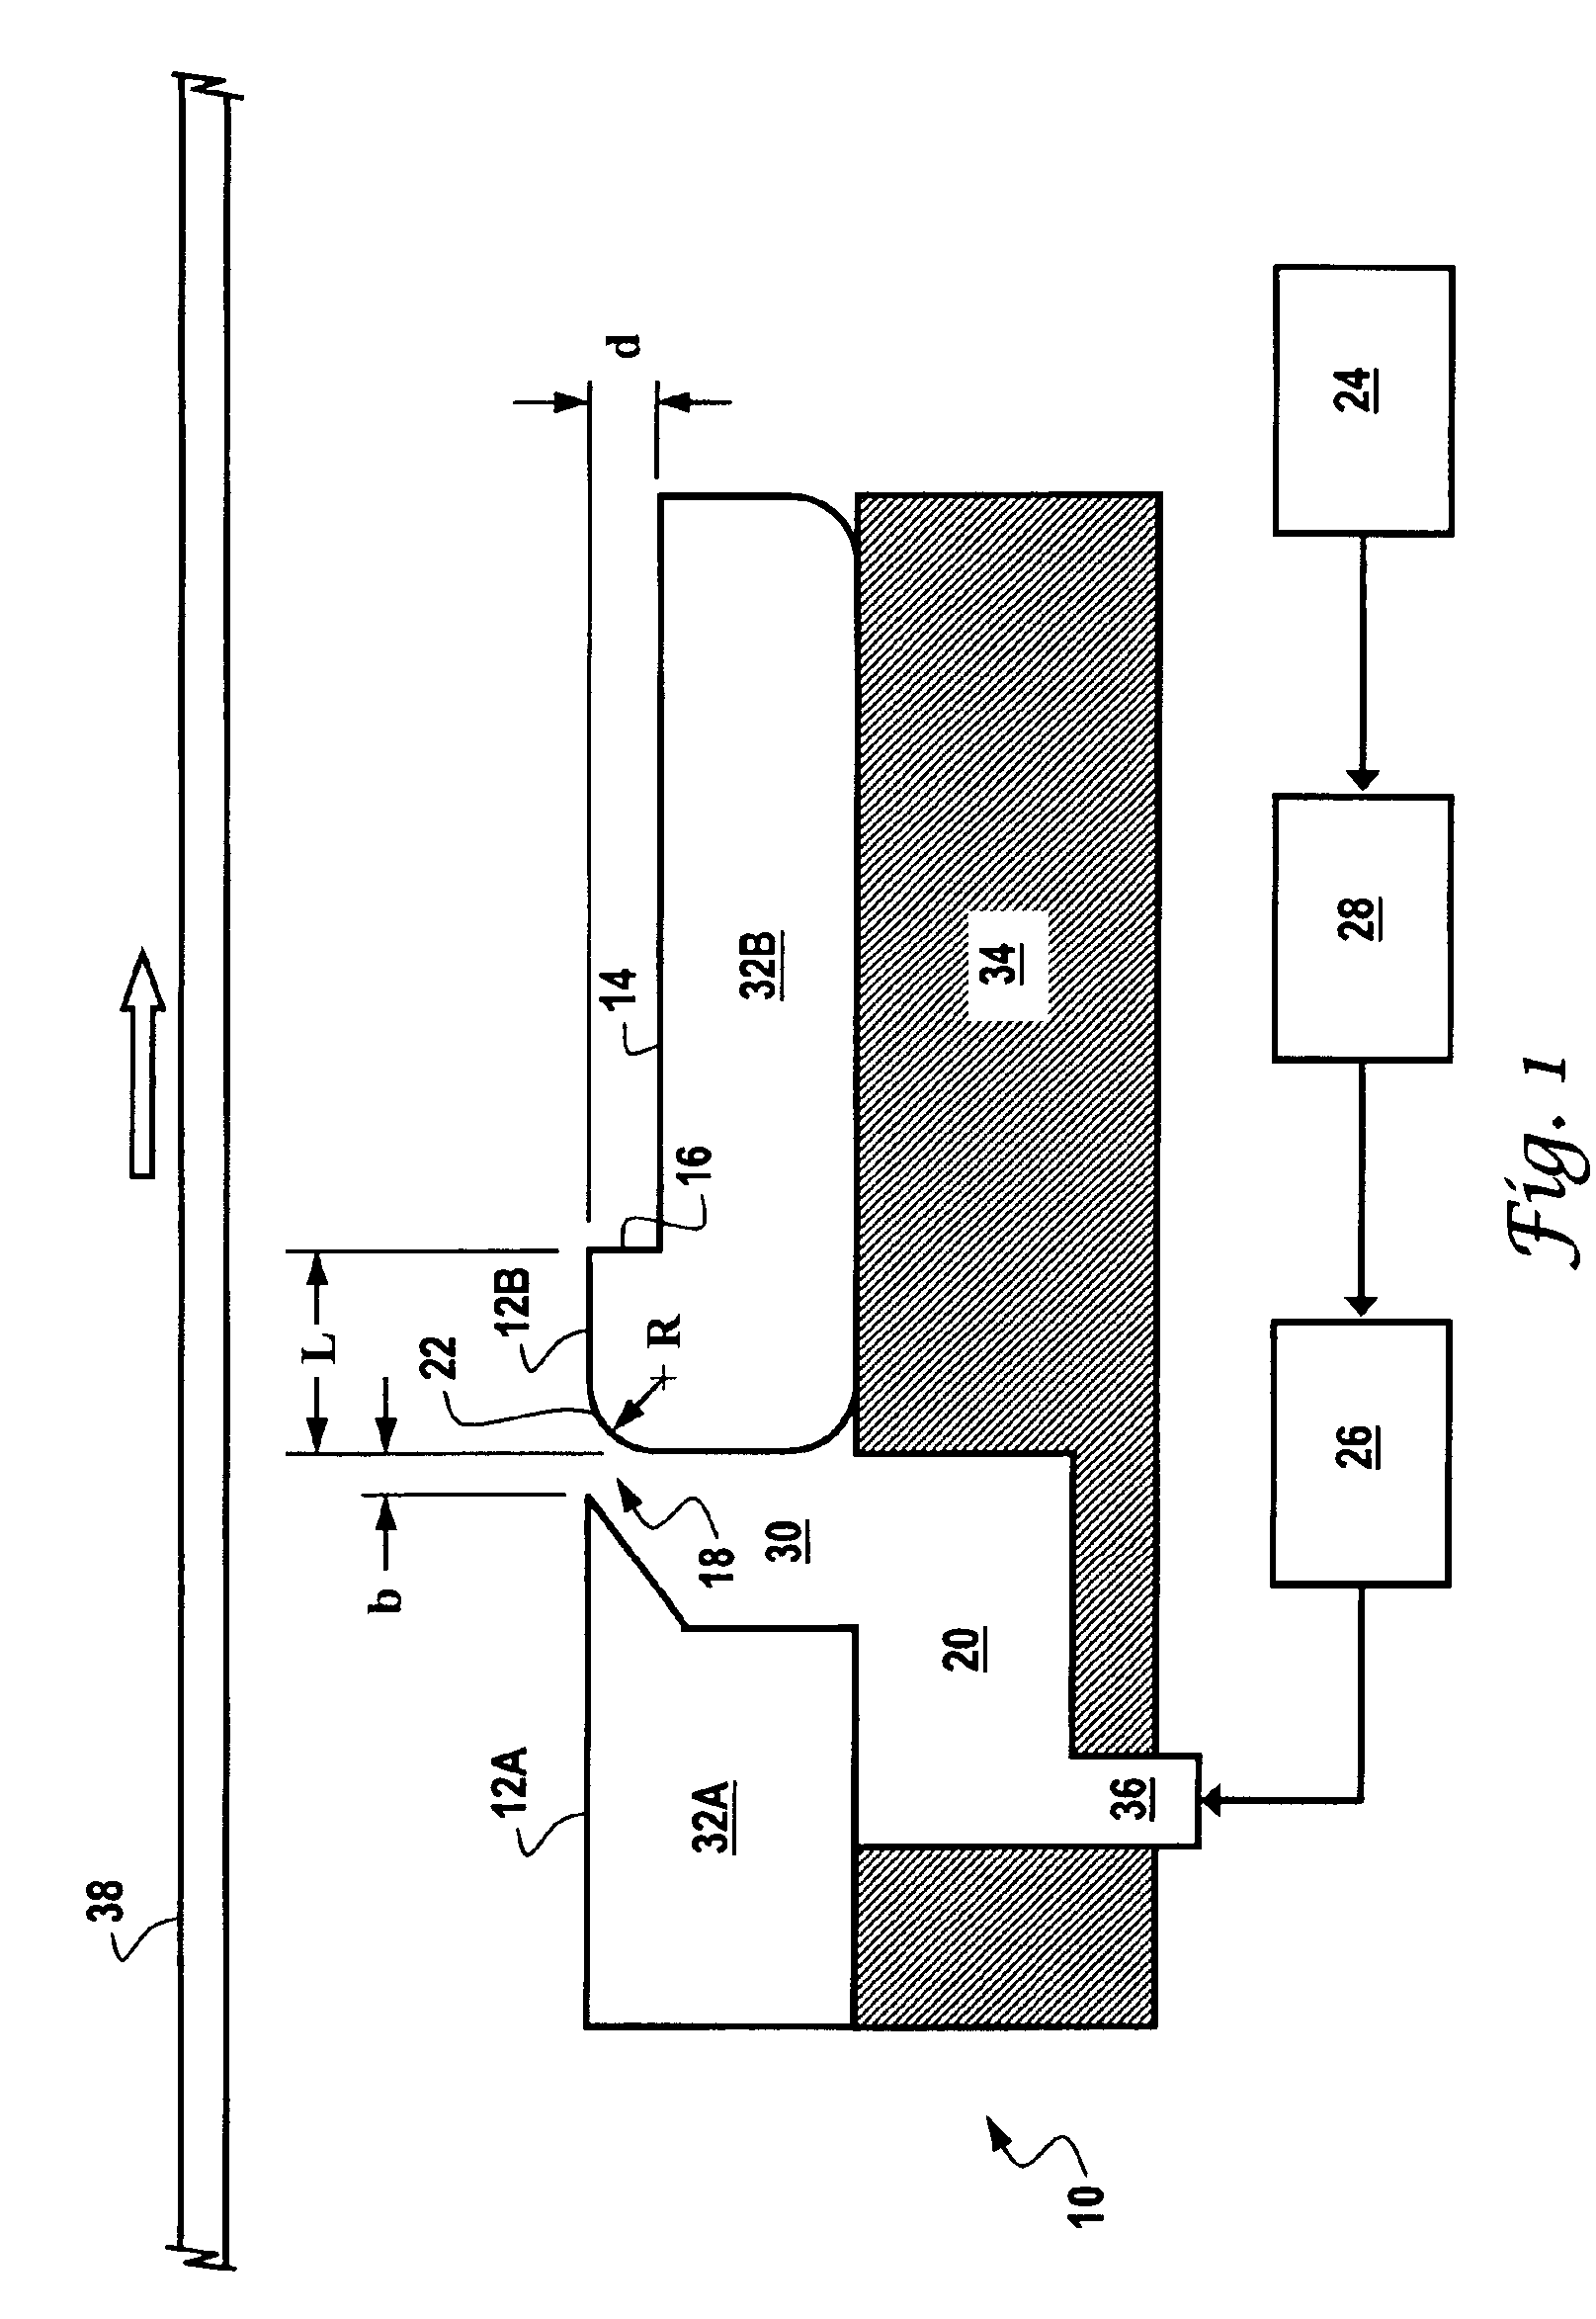 Air clamp stabilizer for continuous web materials